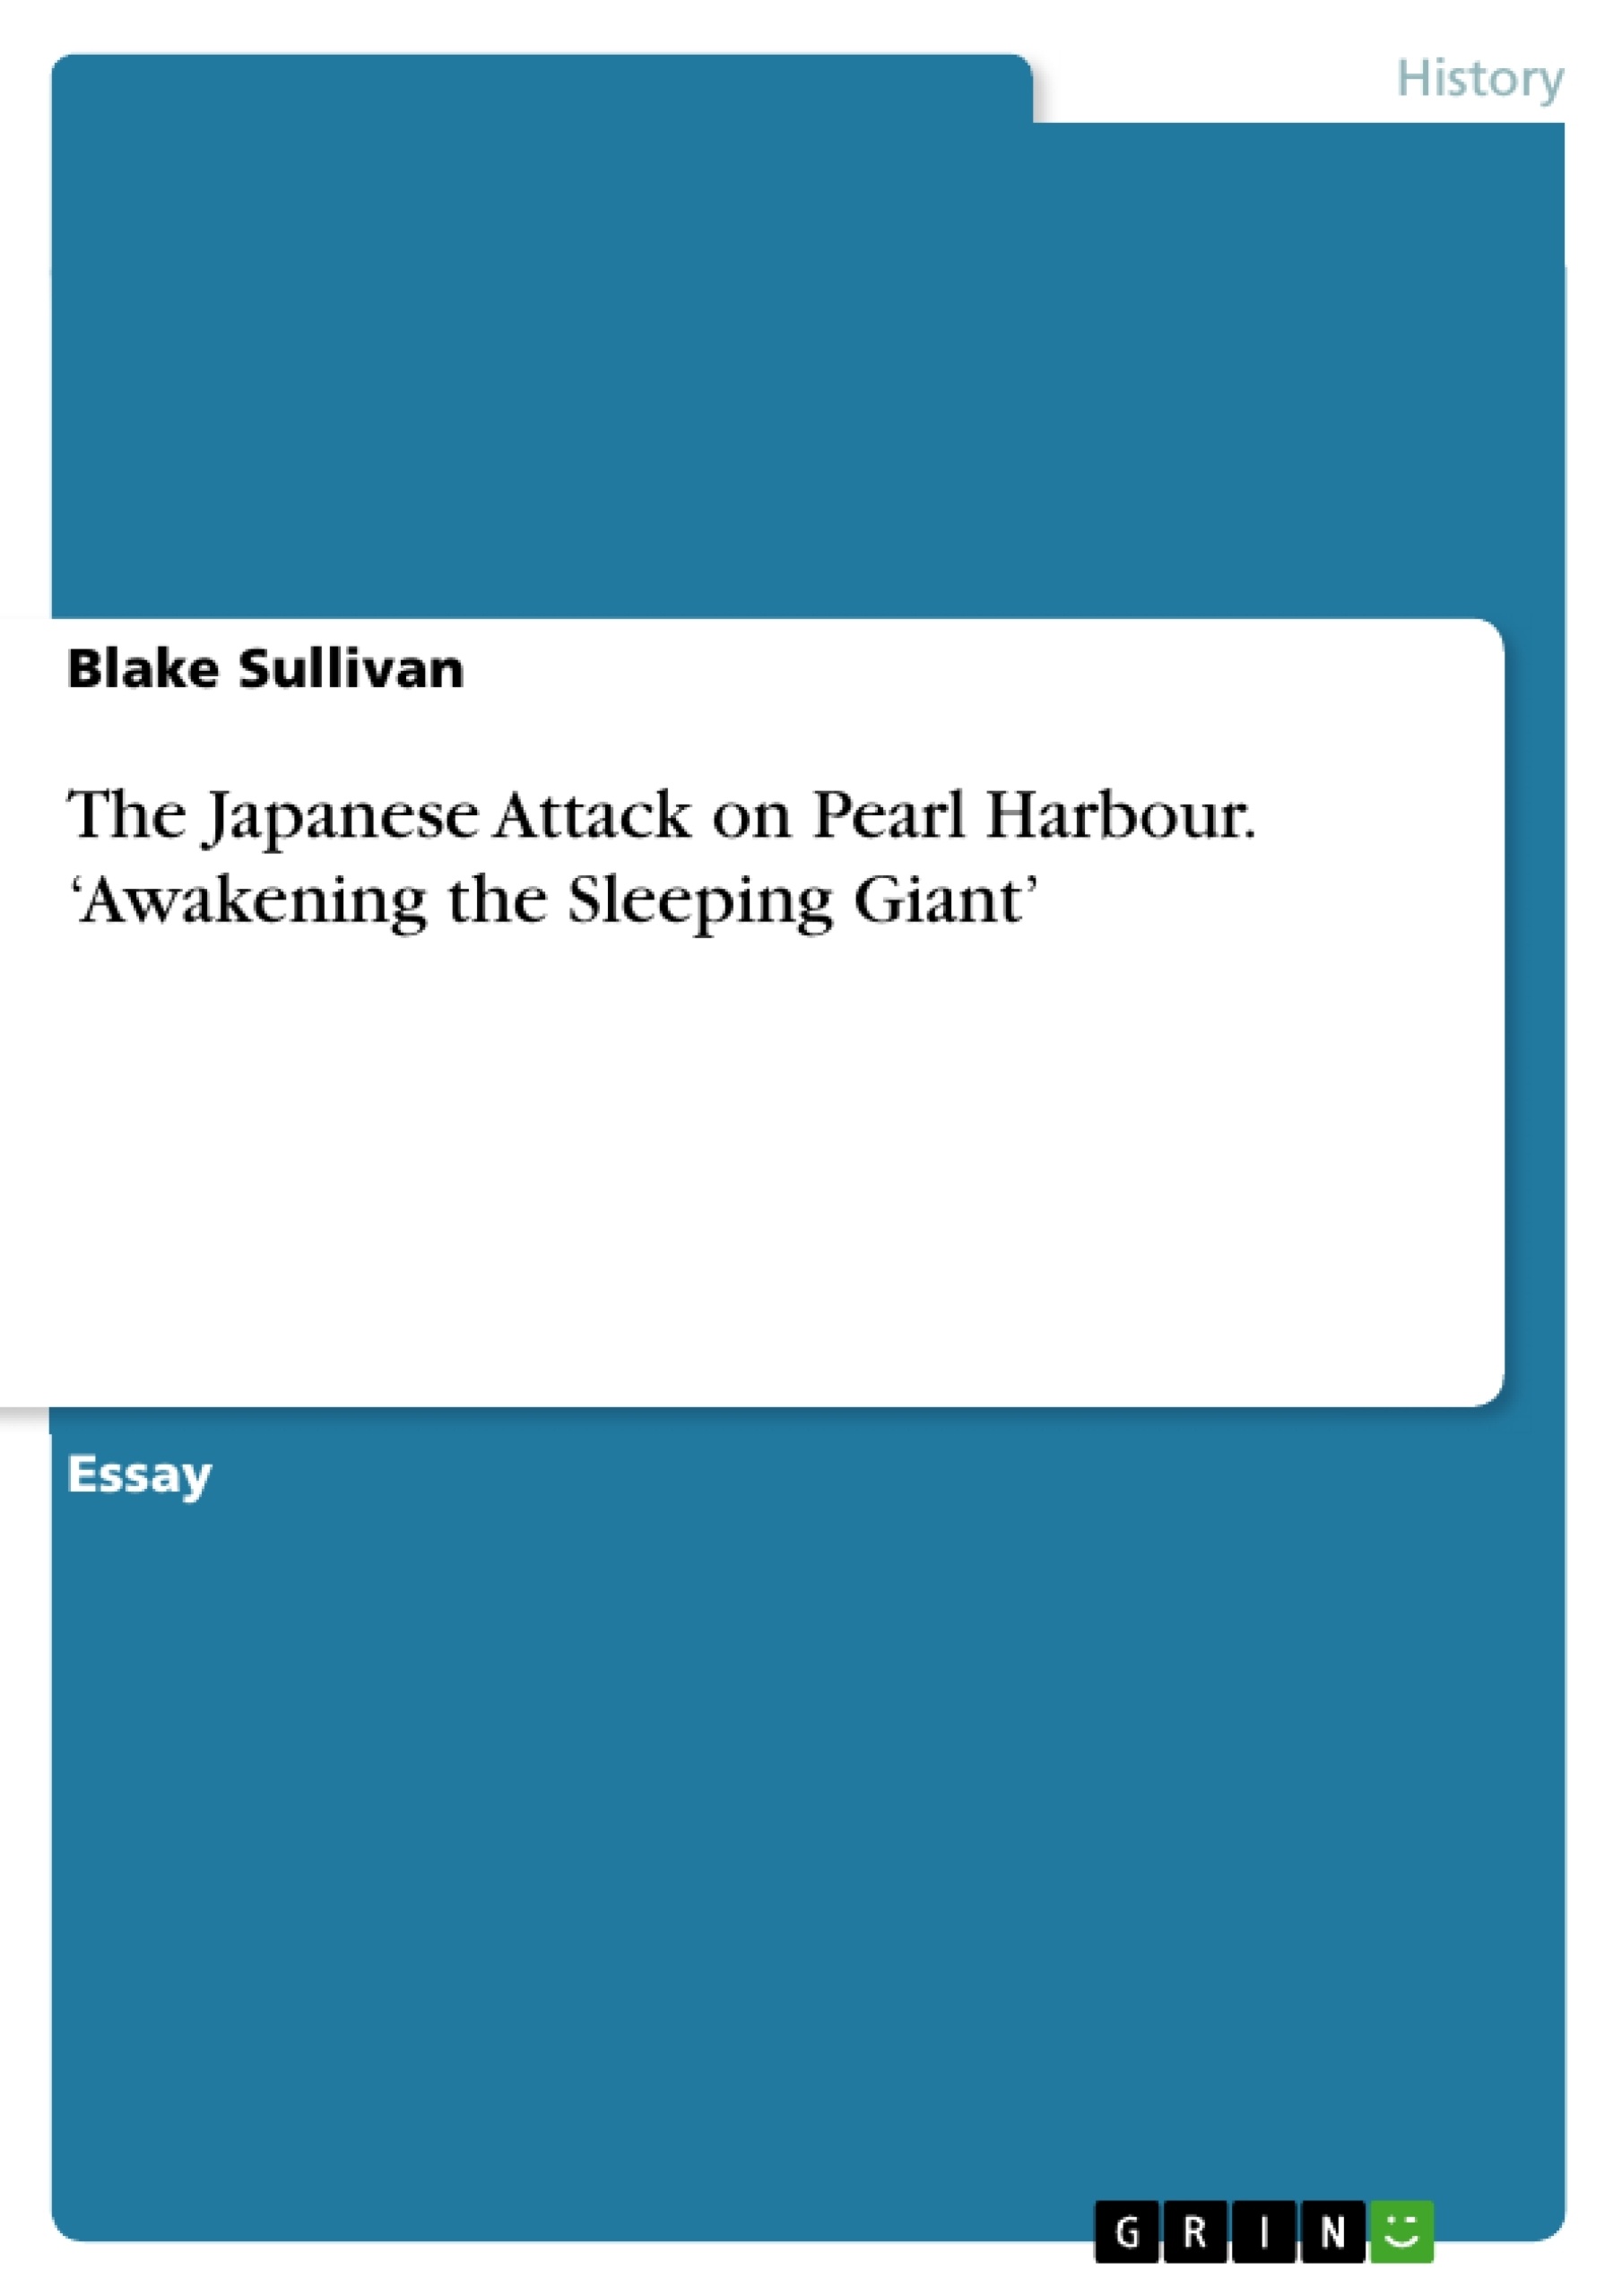 Title: The Japanese Attack on Pearl Harbour.
‘Awakening the Sleeping Giant’